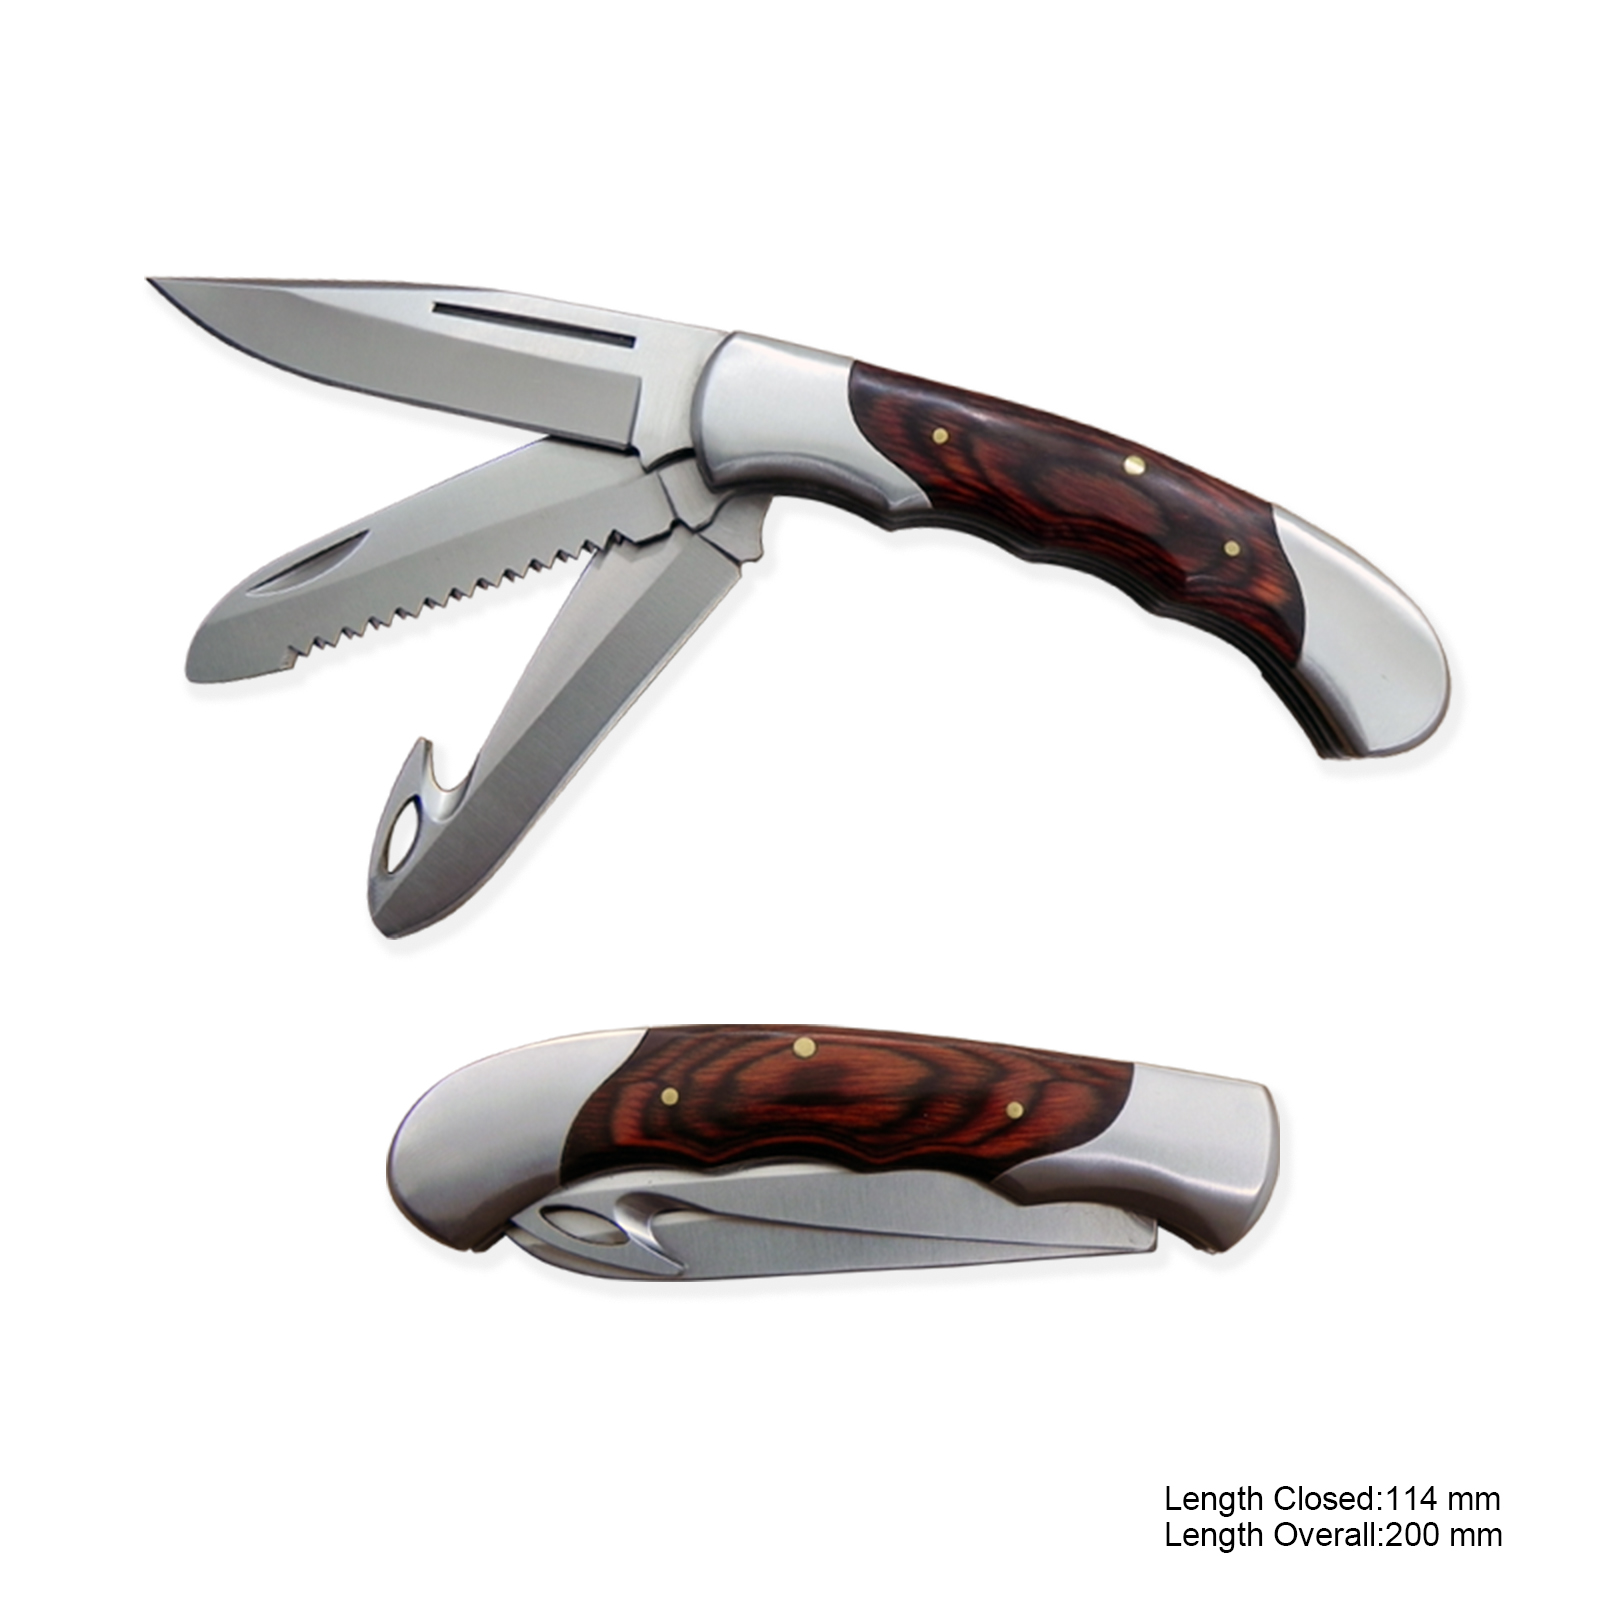 #3439 3-Blade Knife with Wooden Handle